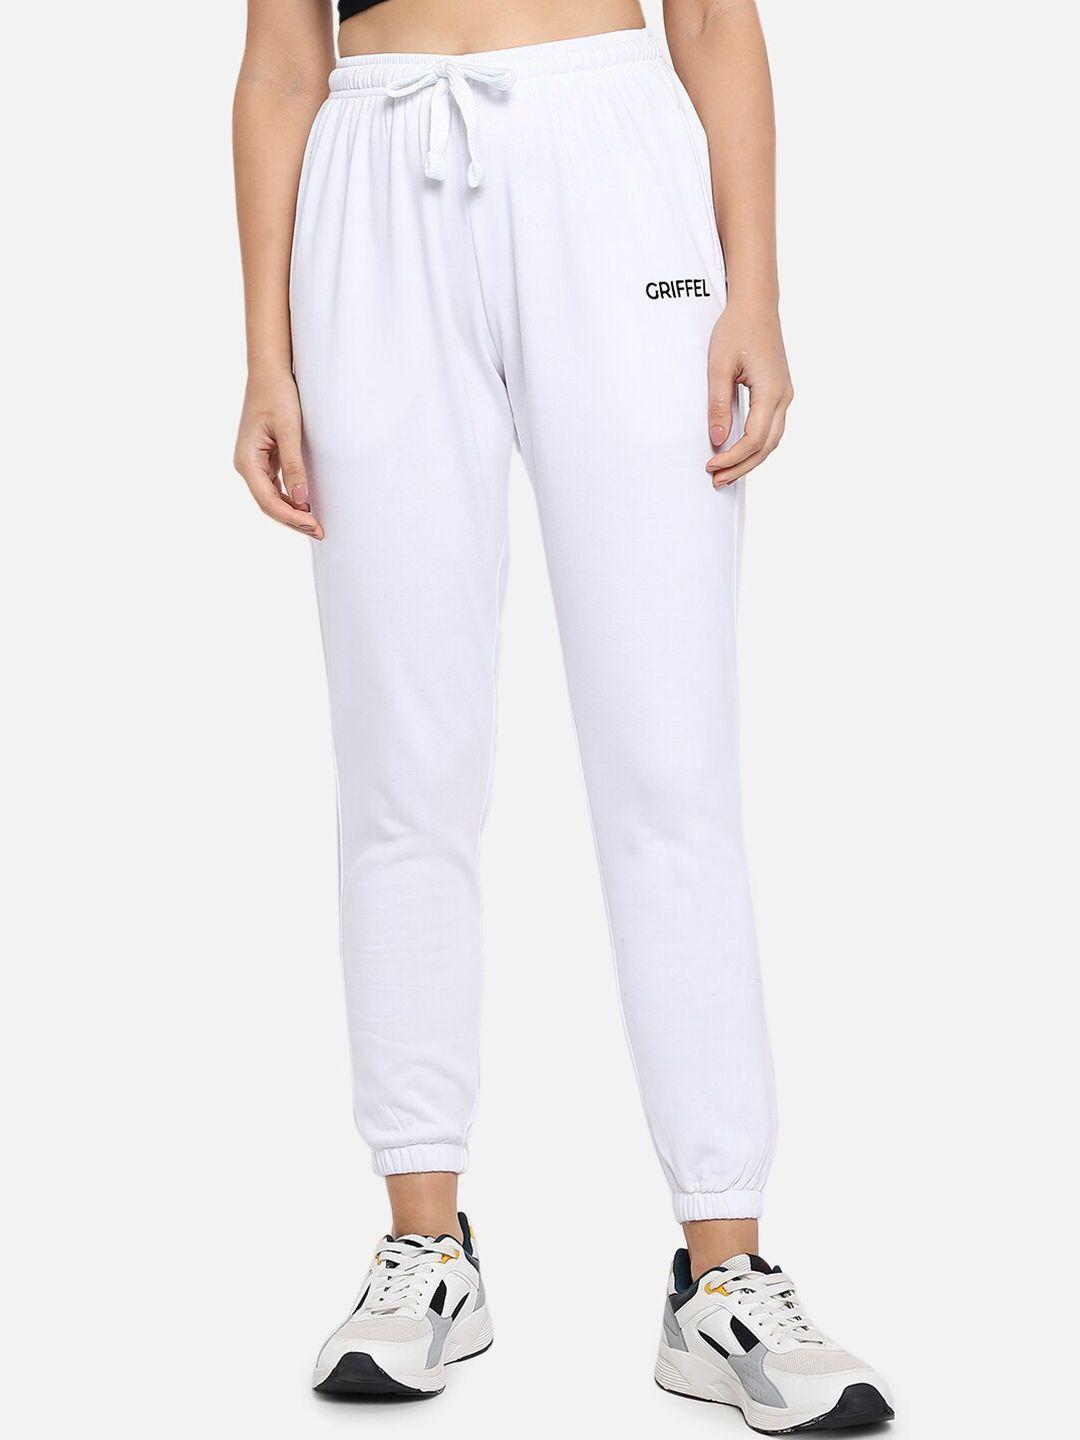 griffel-women-white-solid-joggers